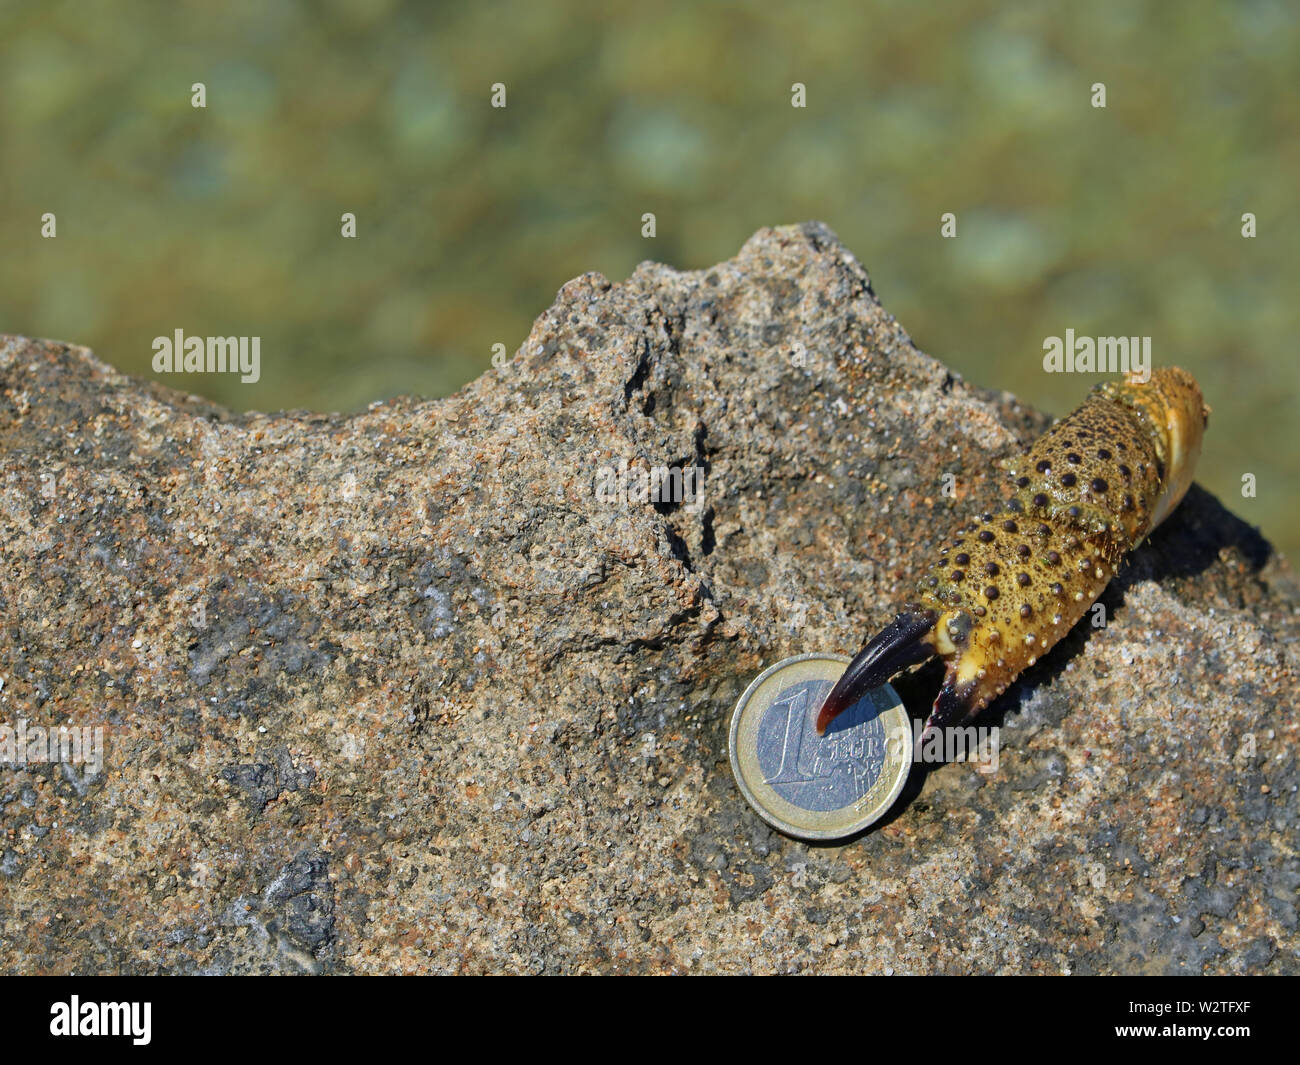 crab on coast try to grab one euro coin, concept of theft on vacation Stock Photo